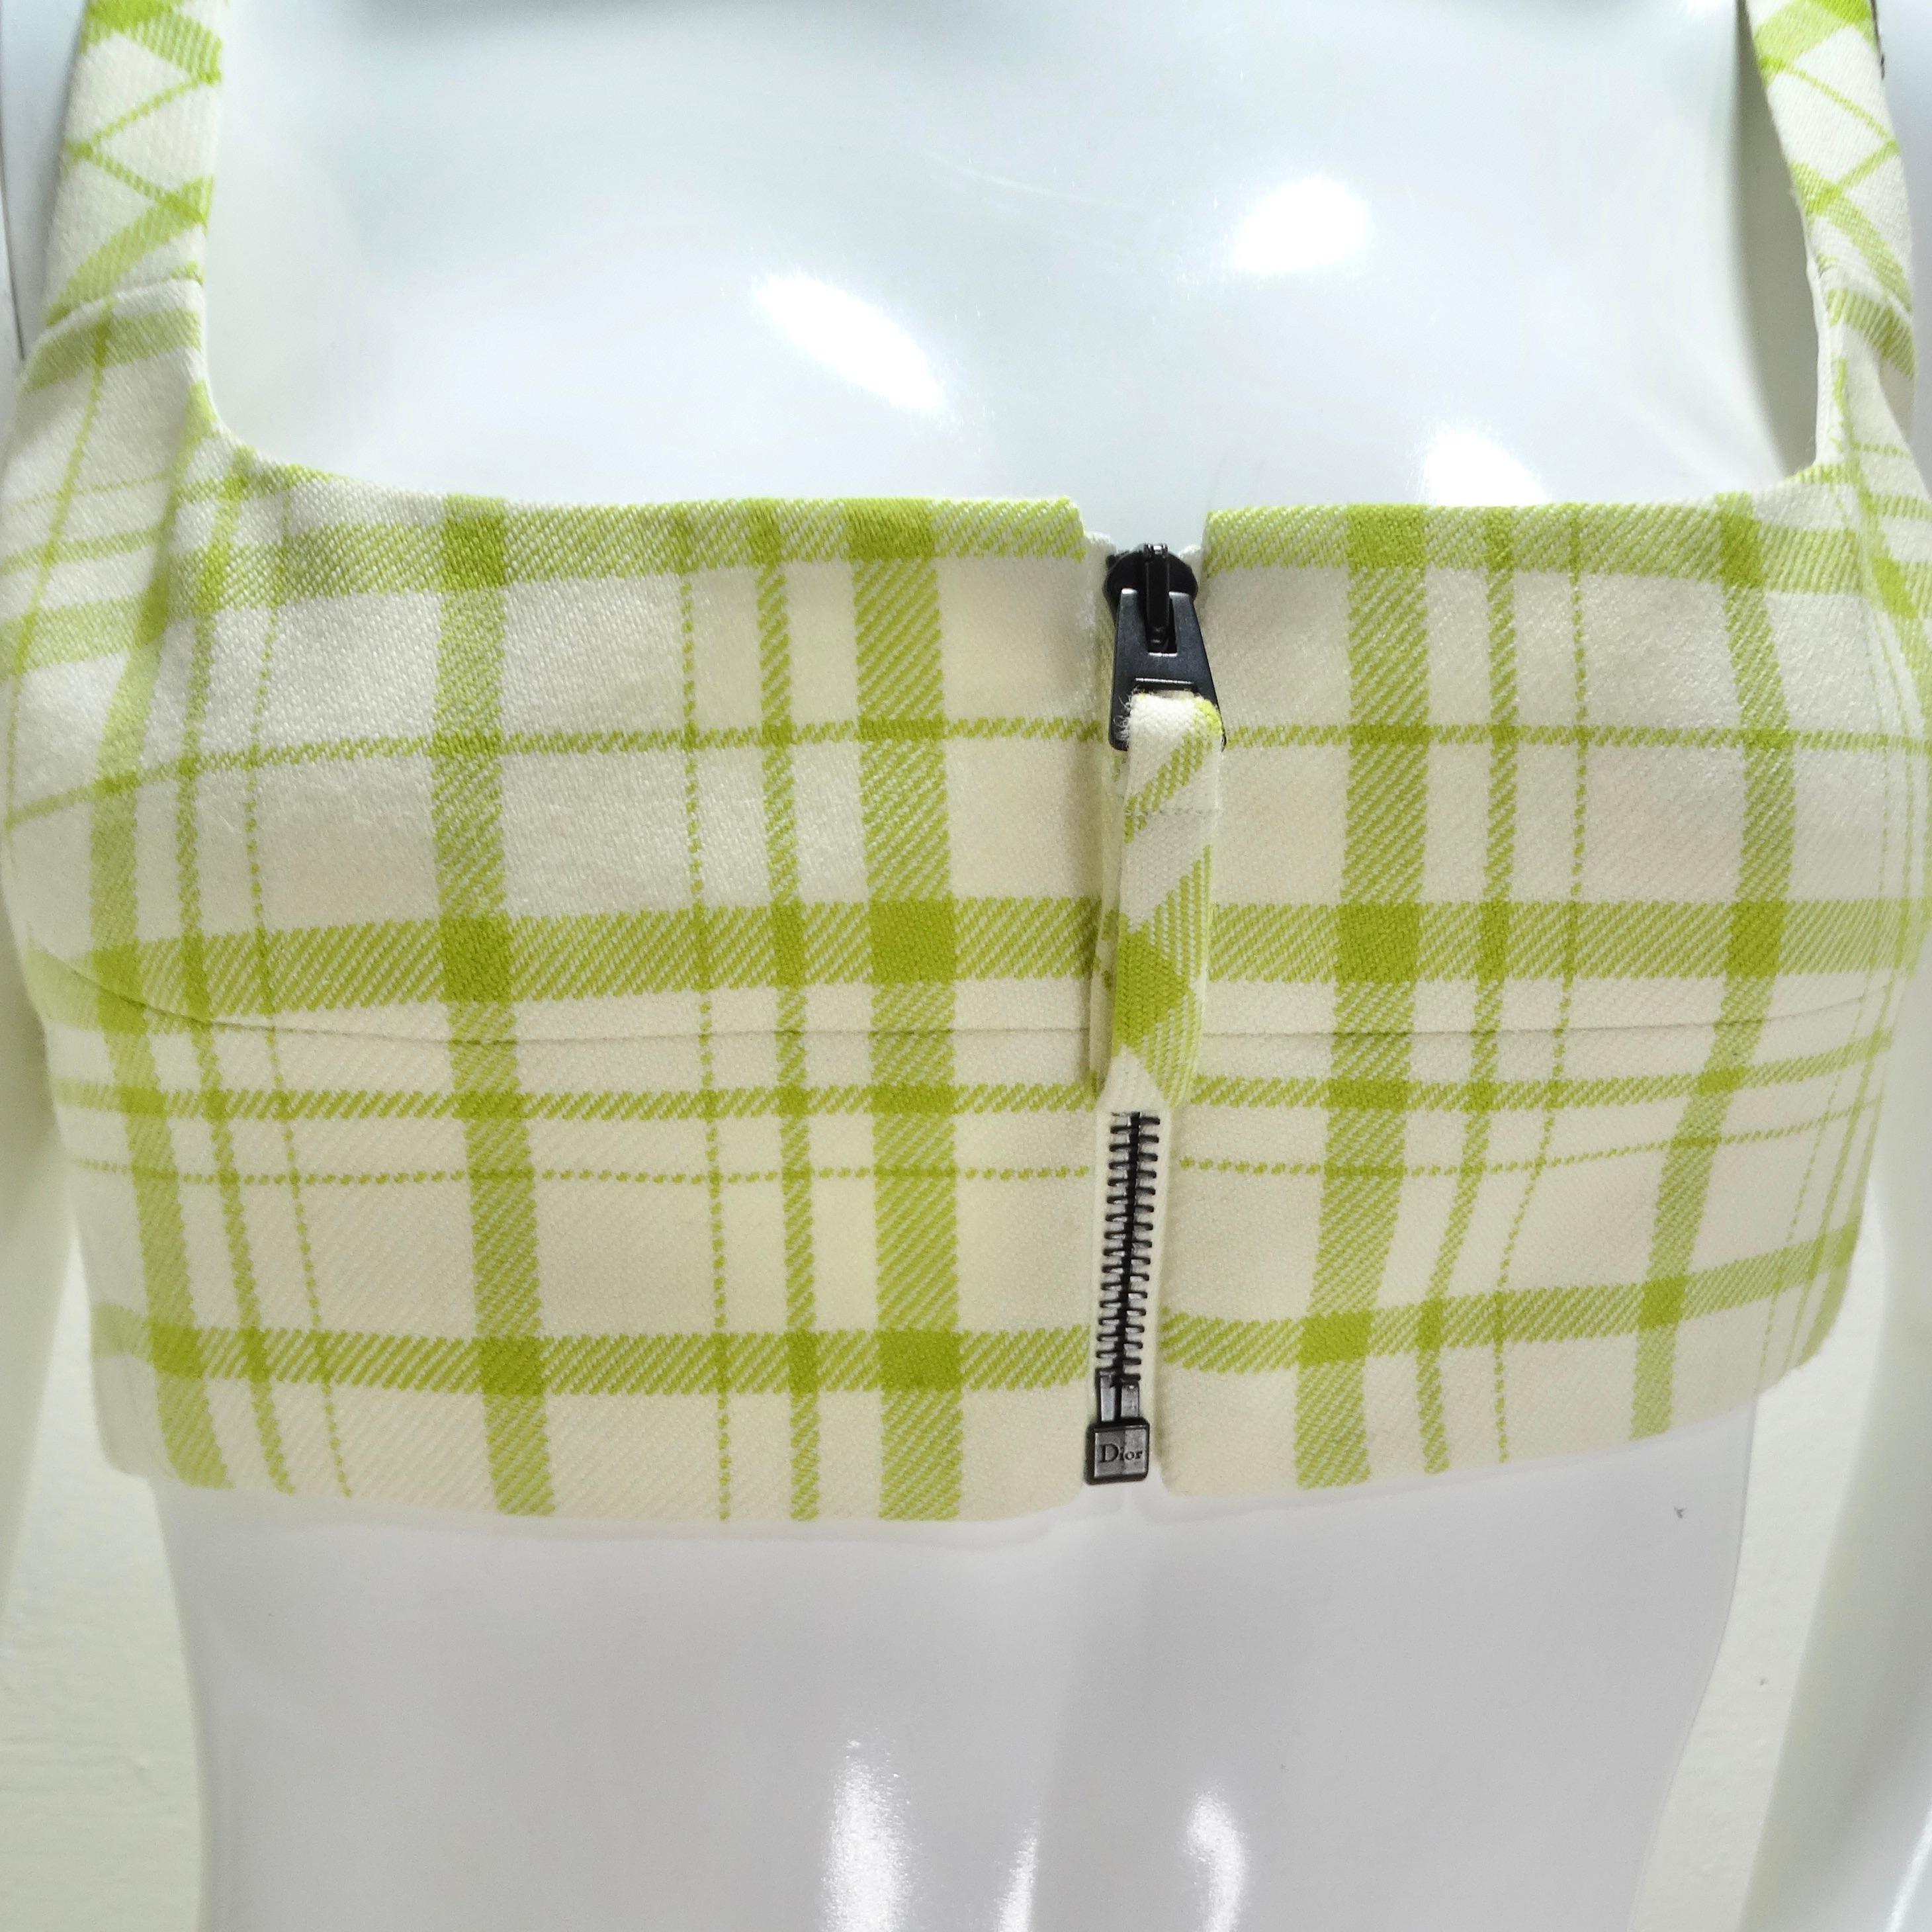 Infuse your wardrobe with vibrant energy using the Christian Dior Plaid Wool Crop Top – a delightful bra-style cropped top that brings together yellow tone lime green and white plaid on luxurious wool. The super cropped style adds a playful touch to